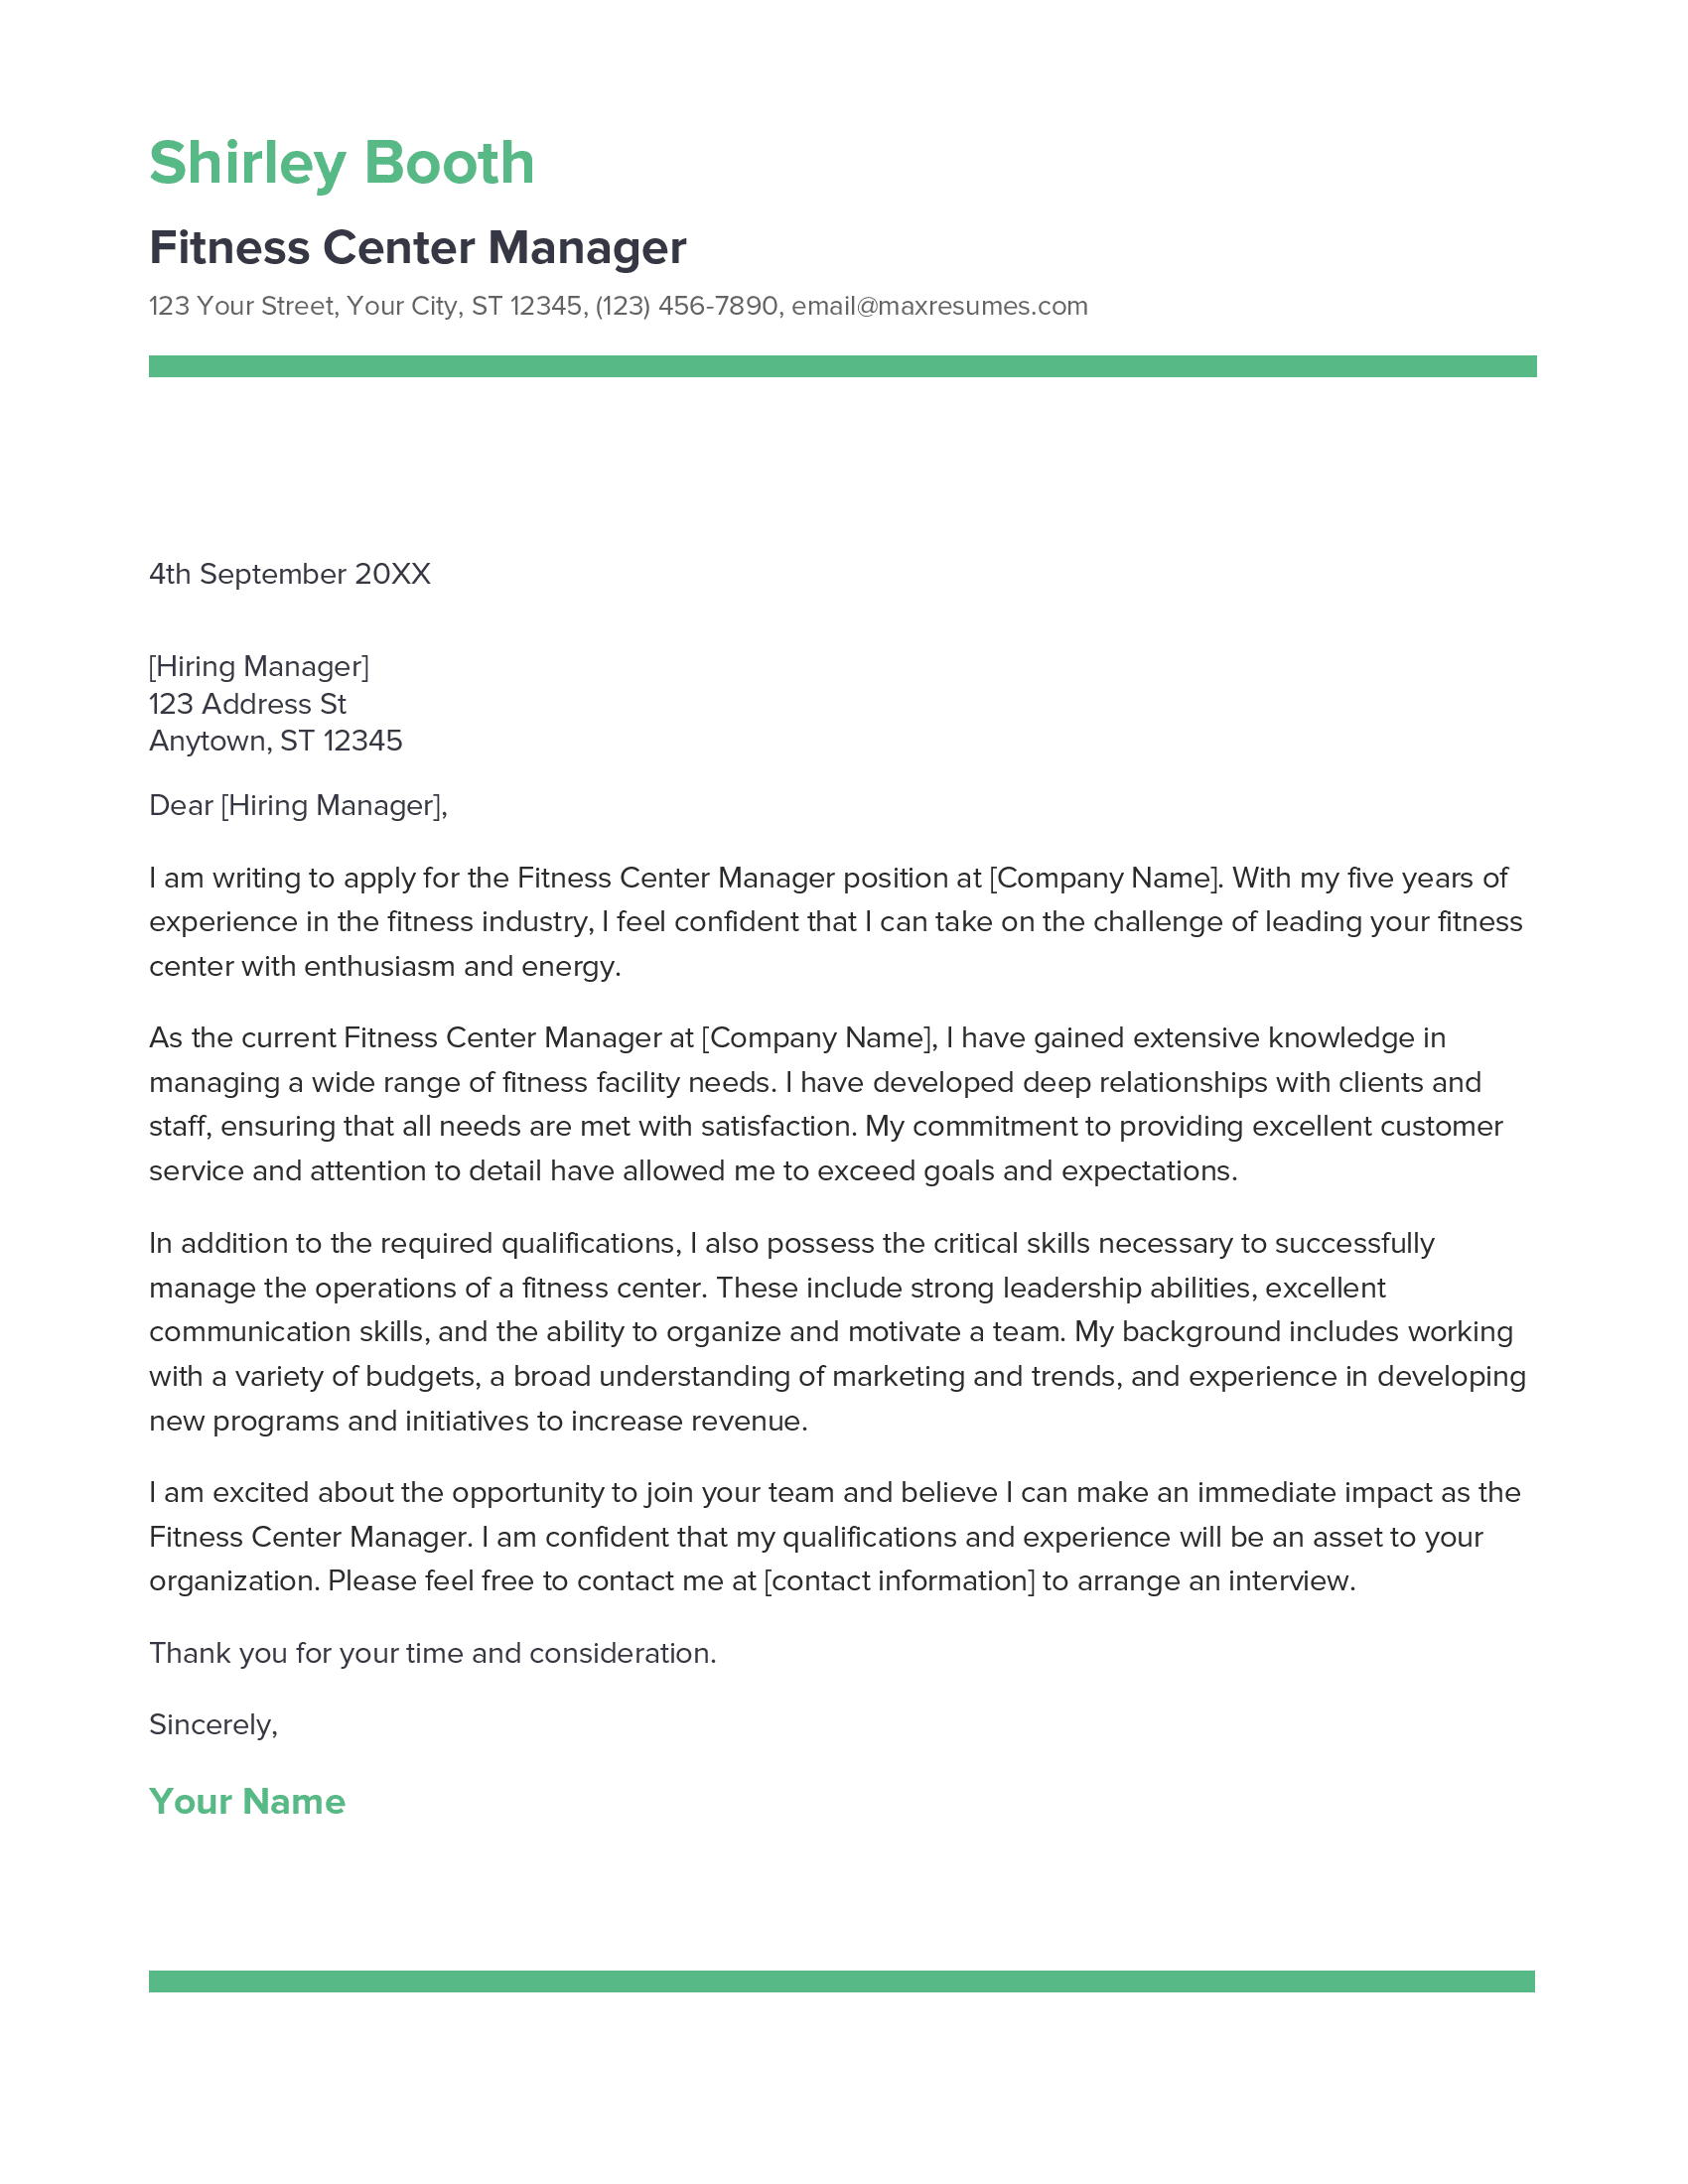 Fitness Center Manager Cover Letter Example